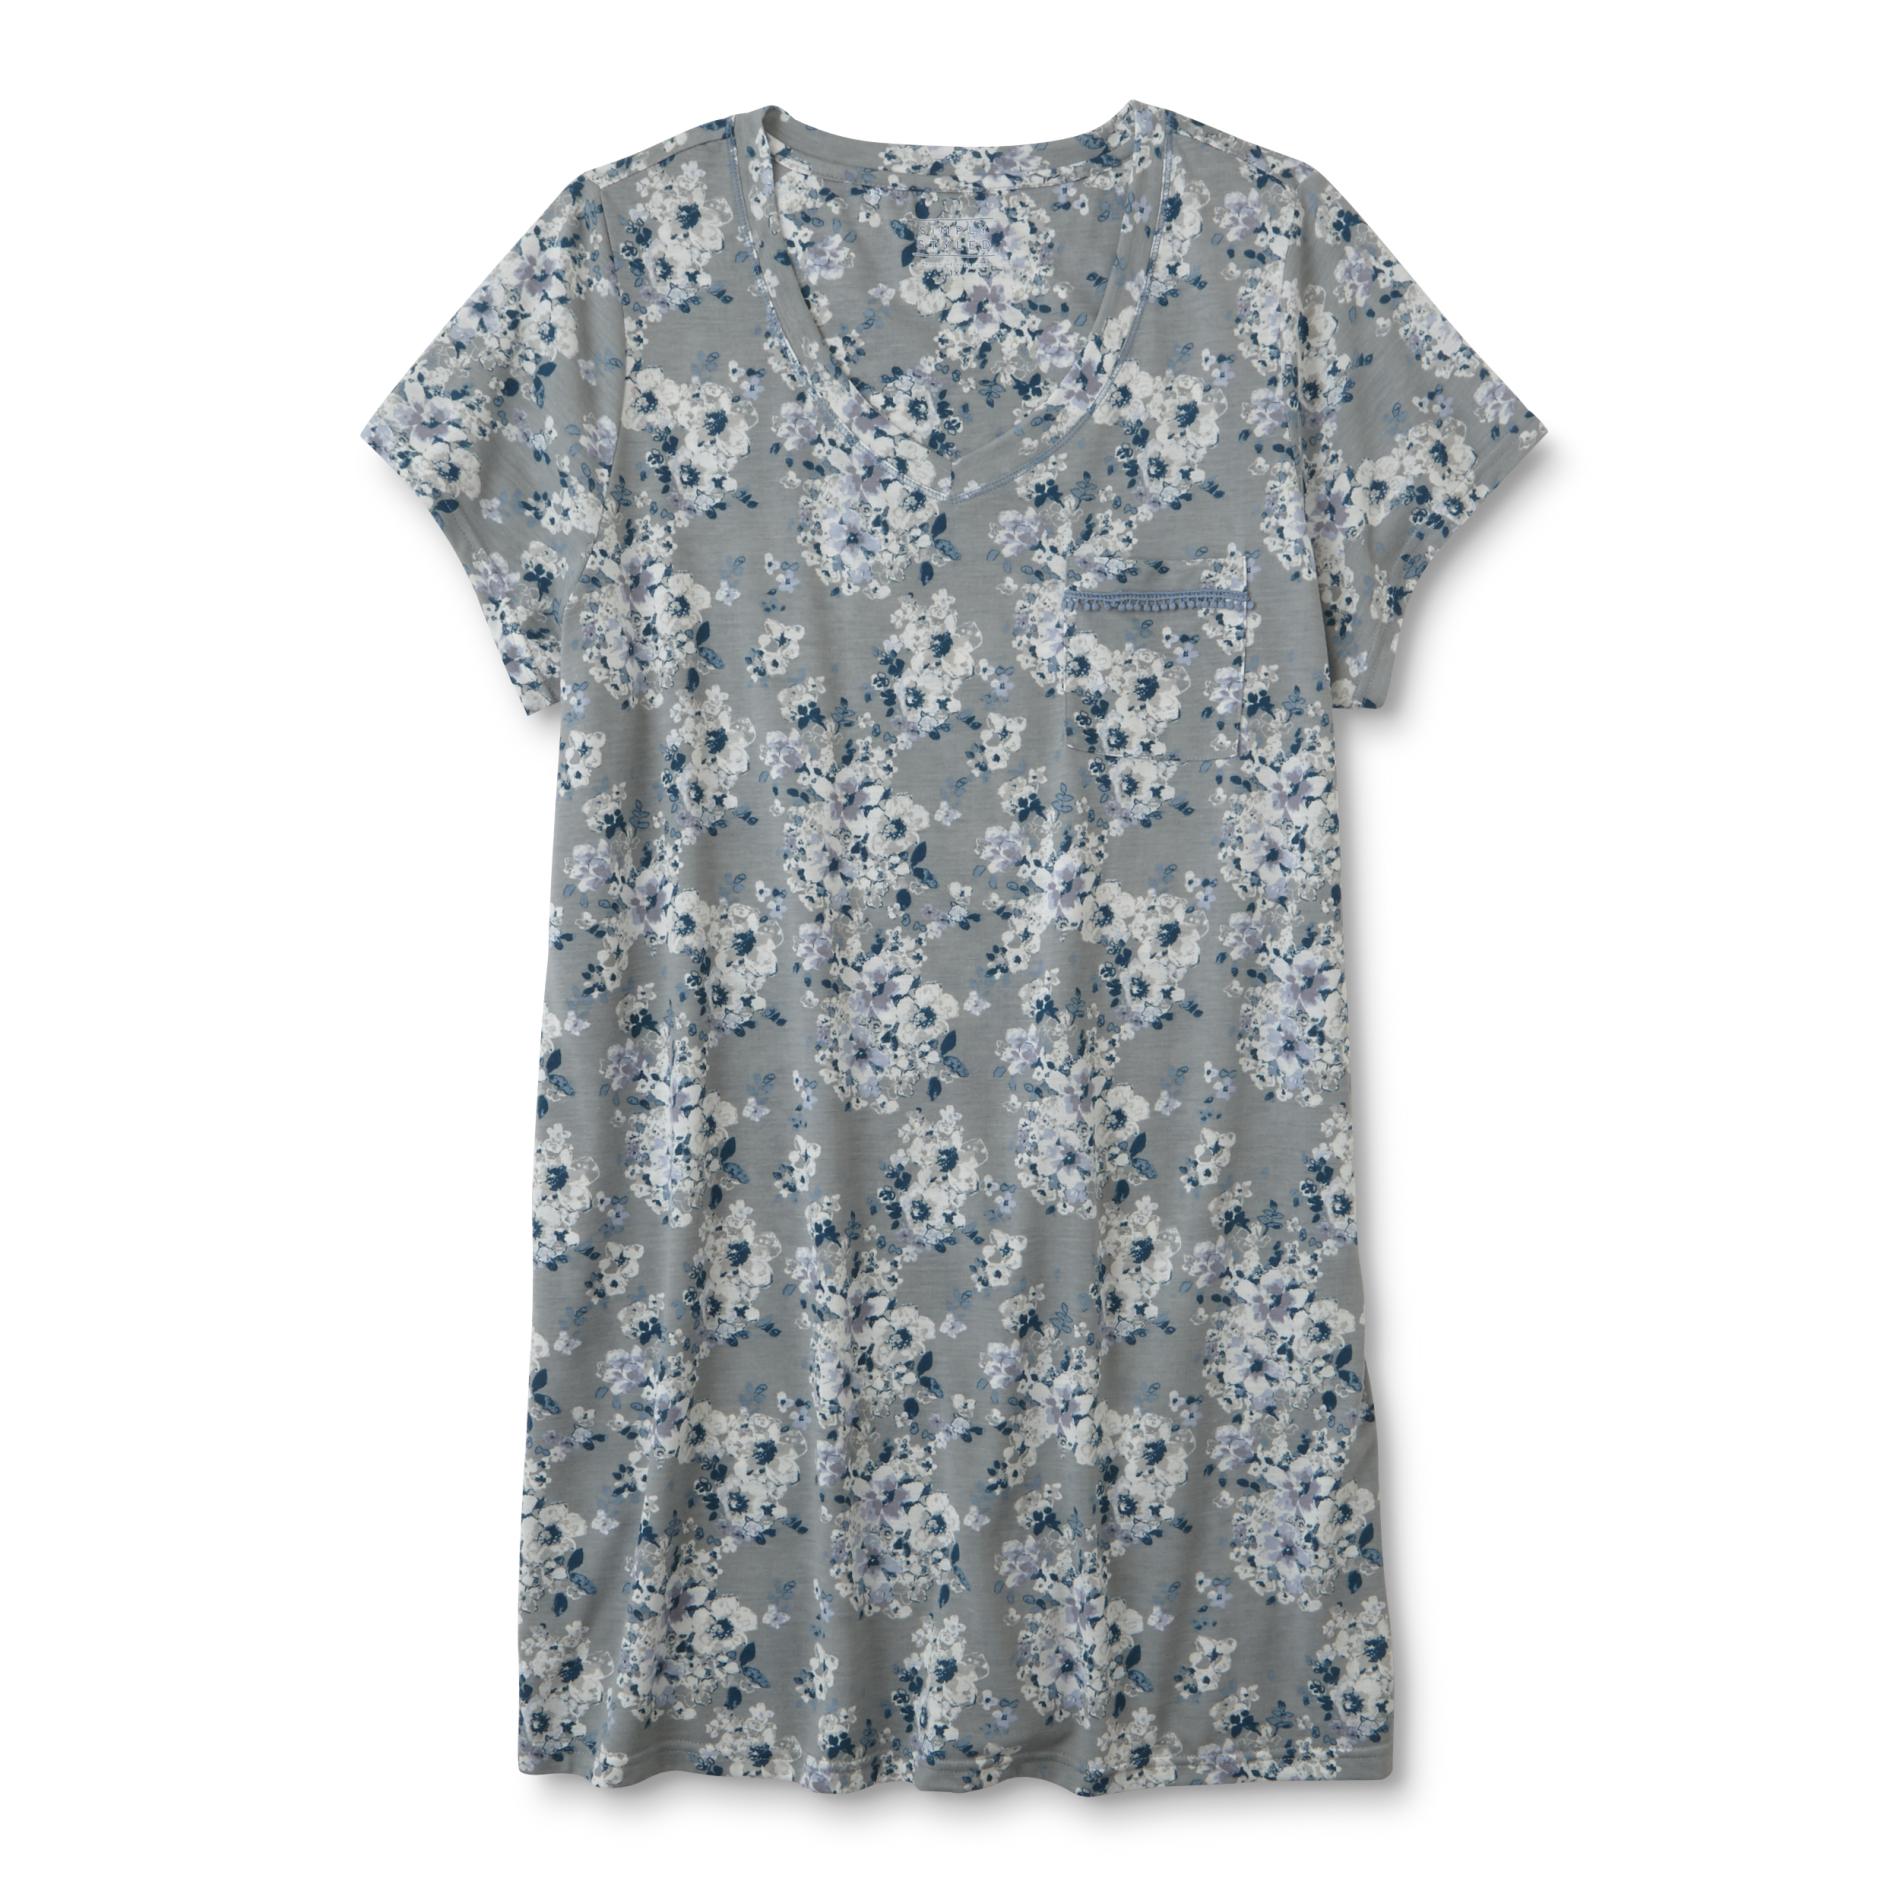 Simply Styled Women's Plus Nightgown - Floral